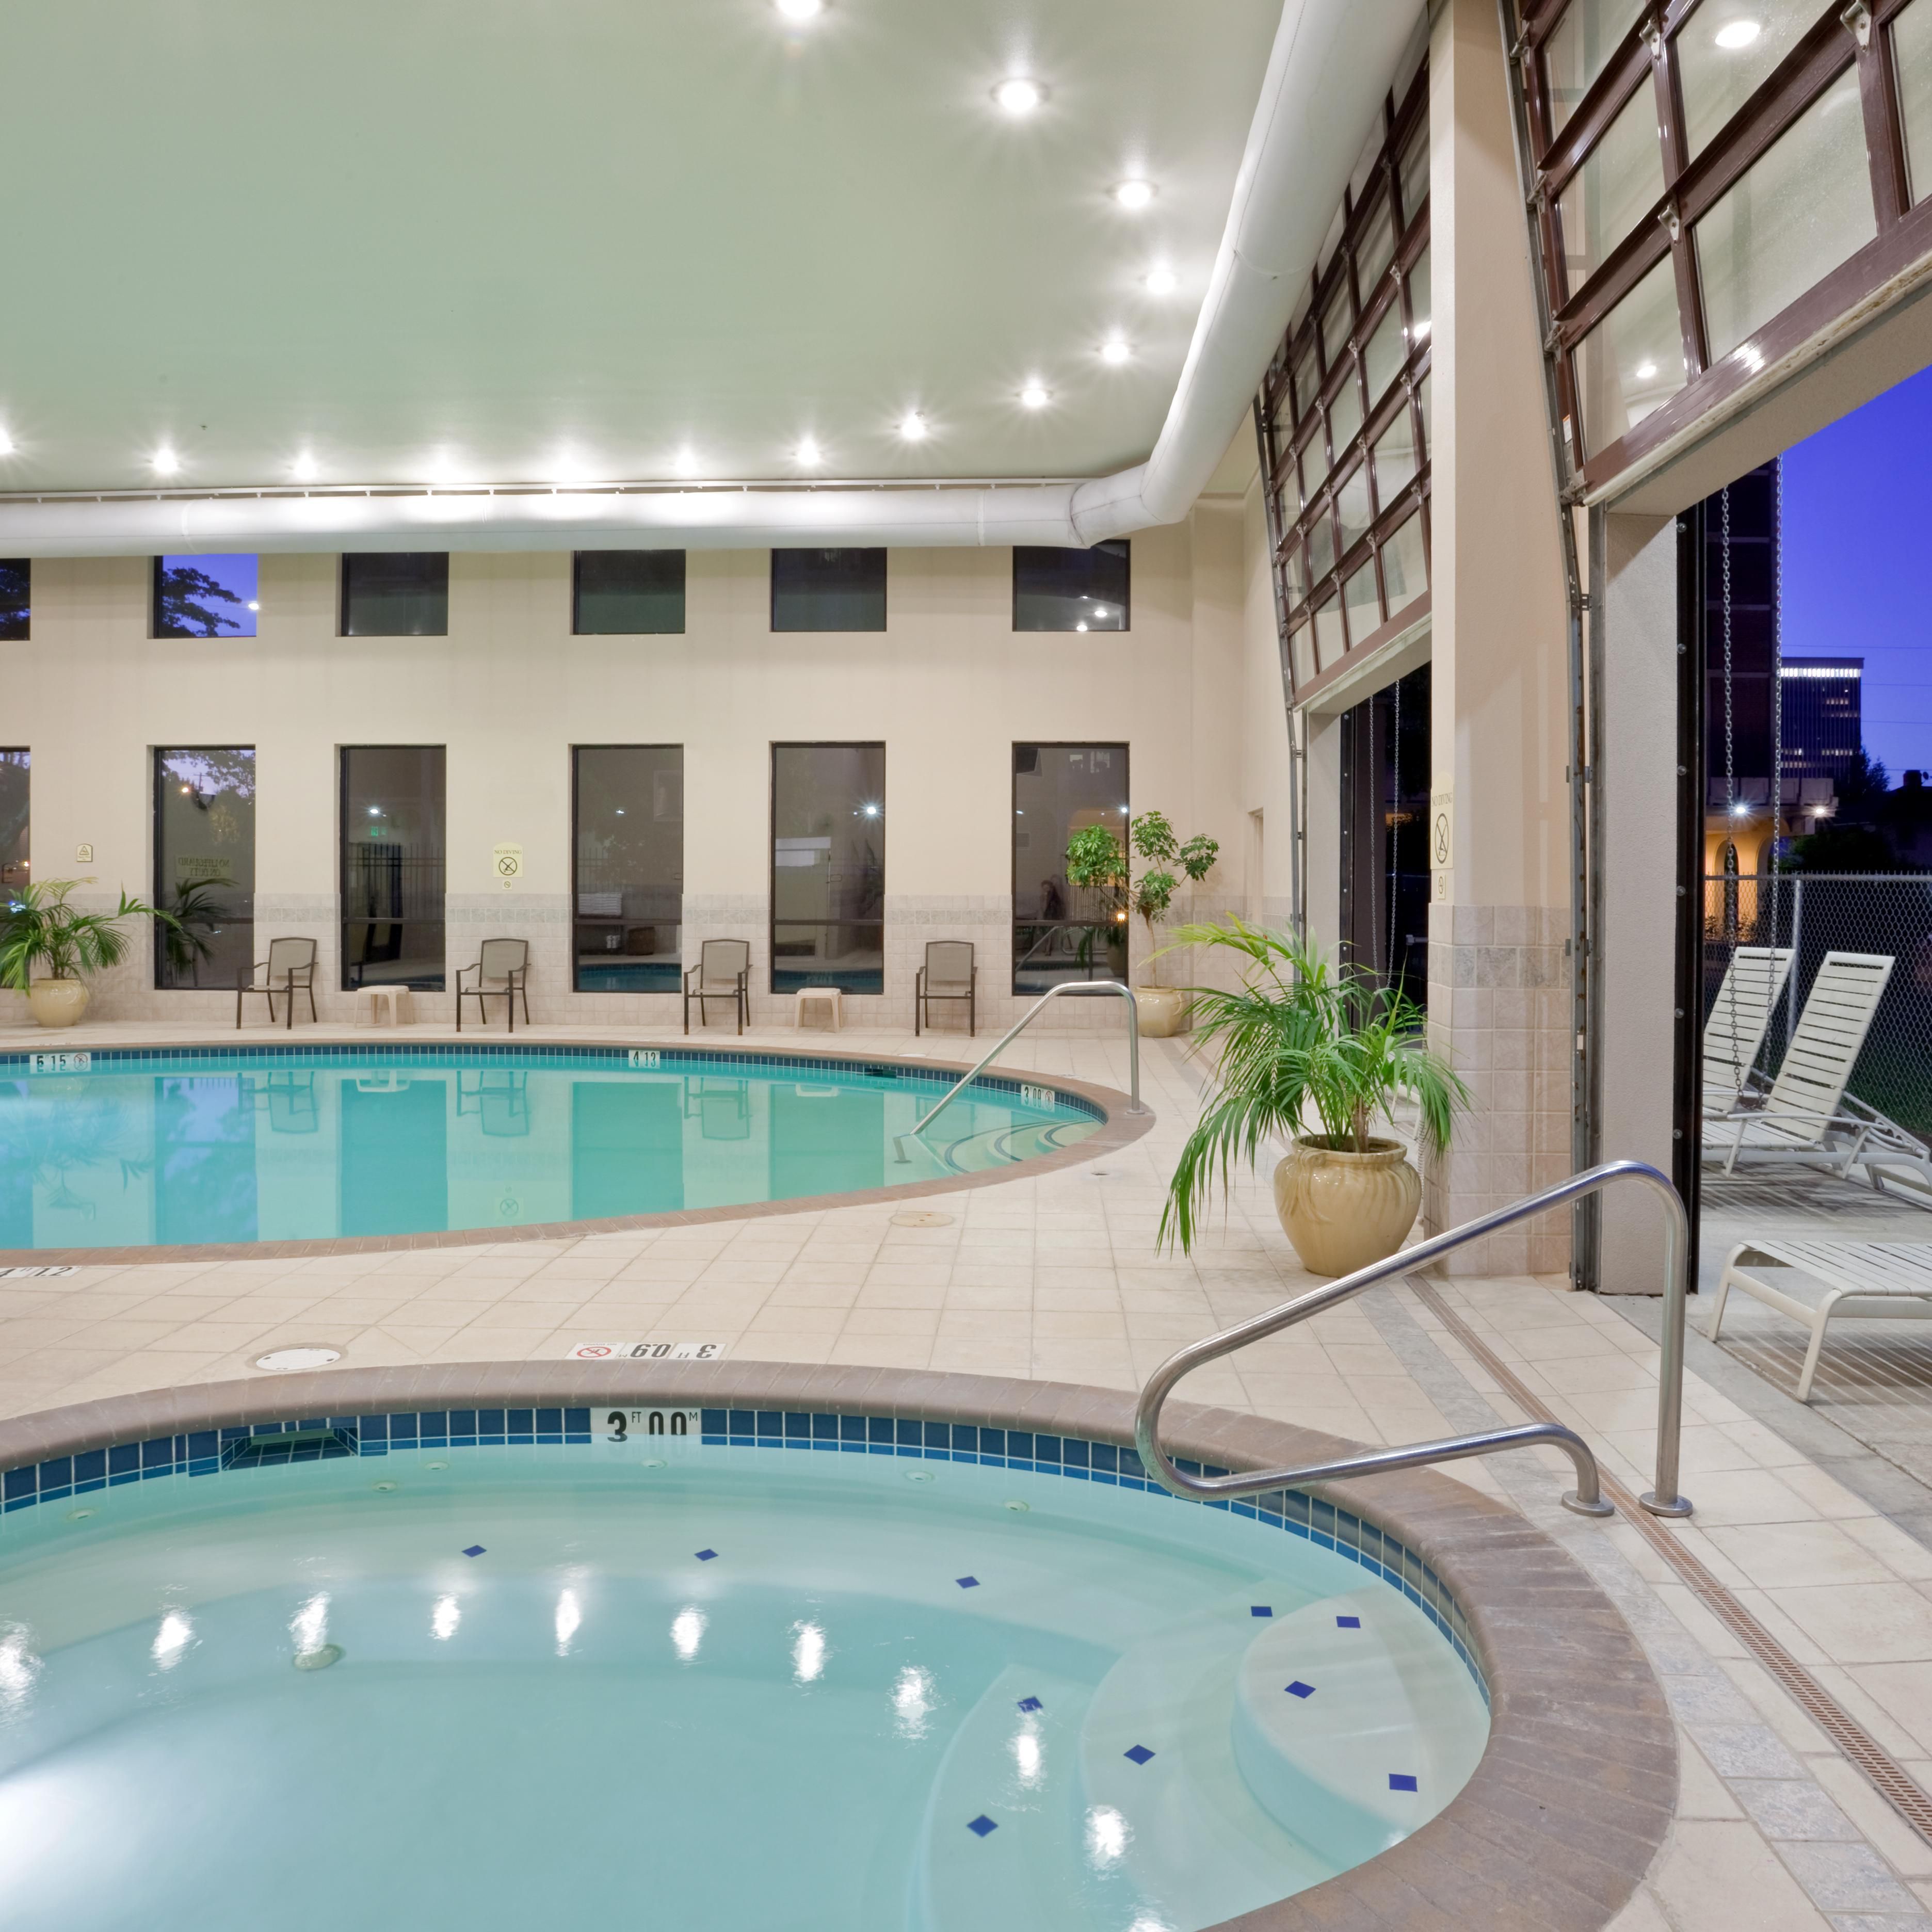 Saltwater Pool &amp; Spa: Crowne Plaza Portland Downtown Convention